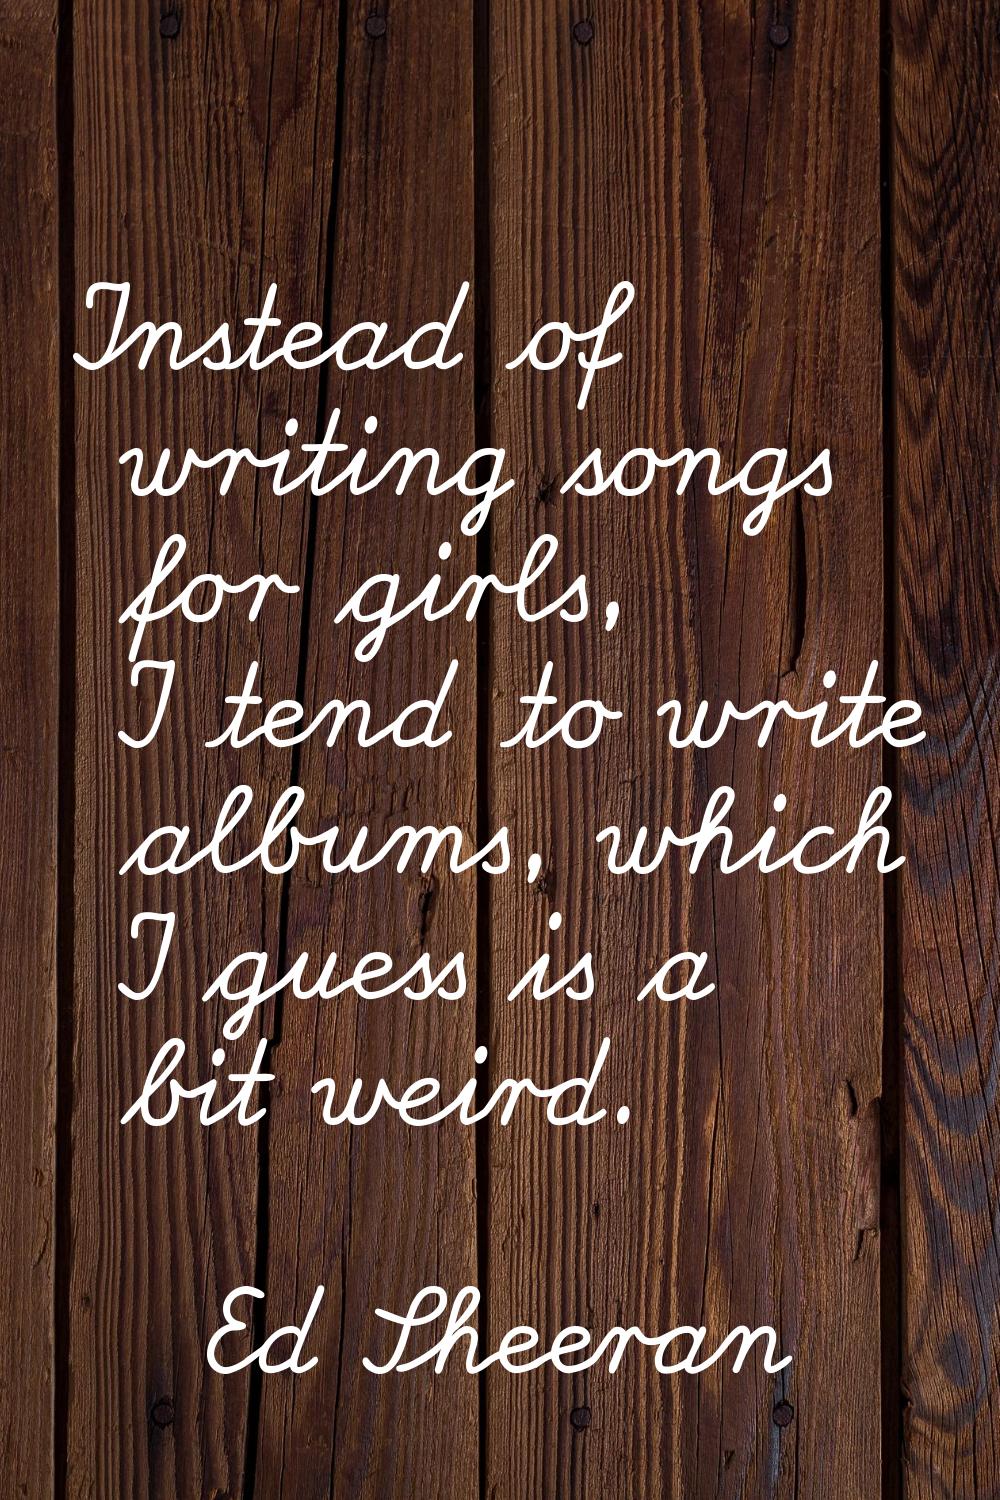 Instead of writing songs for girls, I tend to write albums, which I guess is a bit weird.